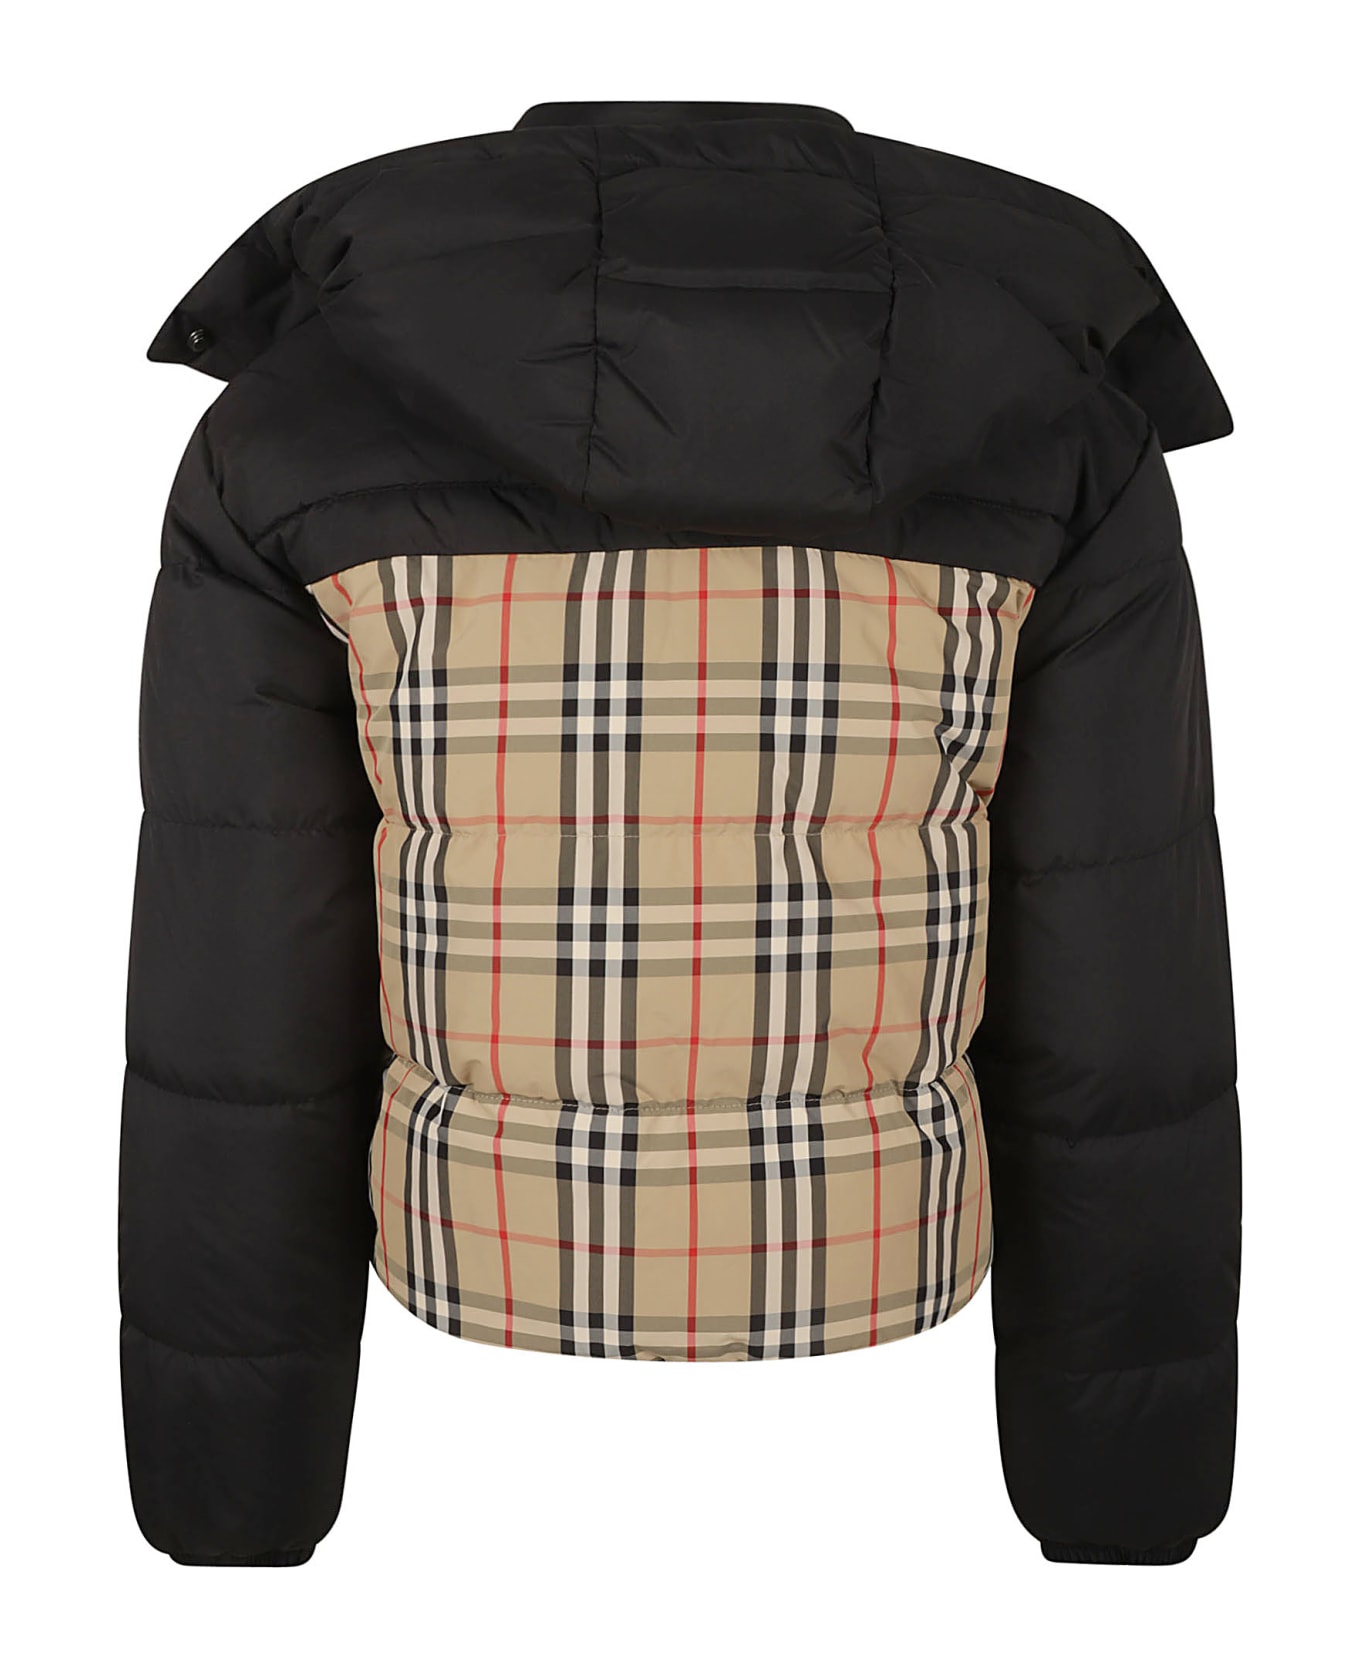 Burberry Lydden Reversible Down Jacket - Archive Beige Ip Chk